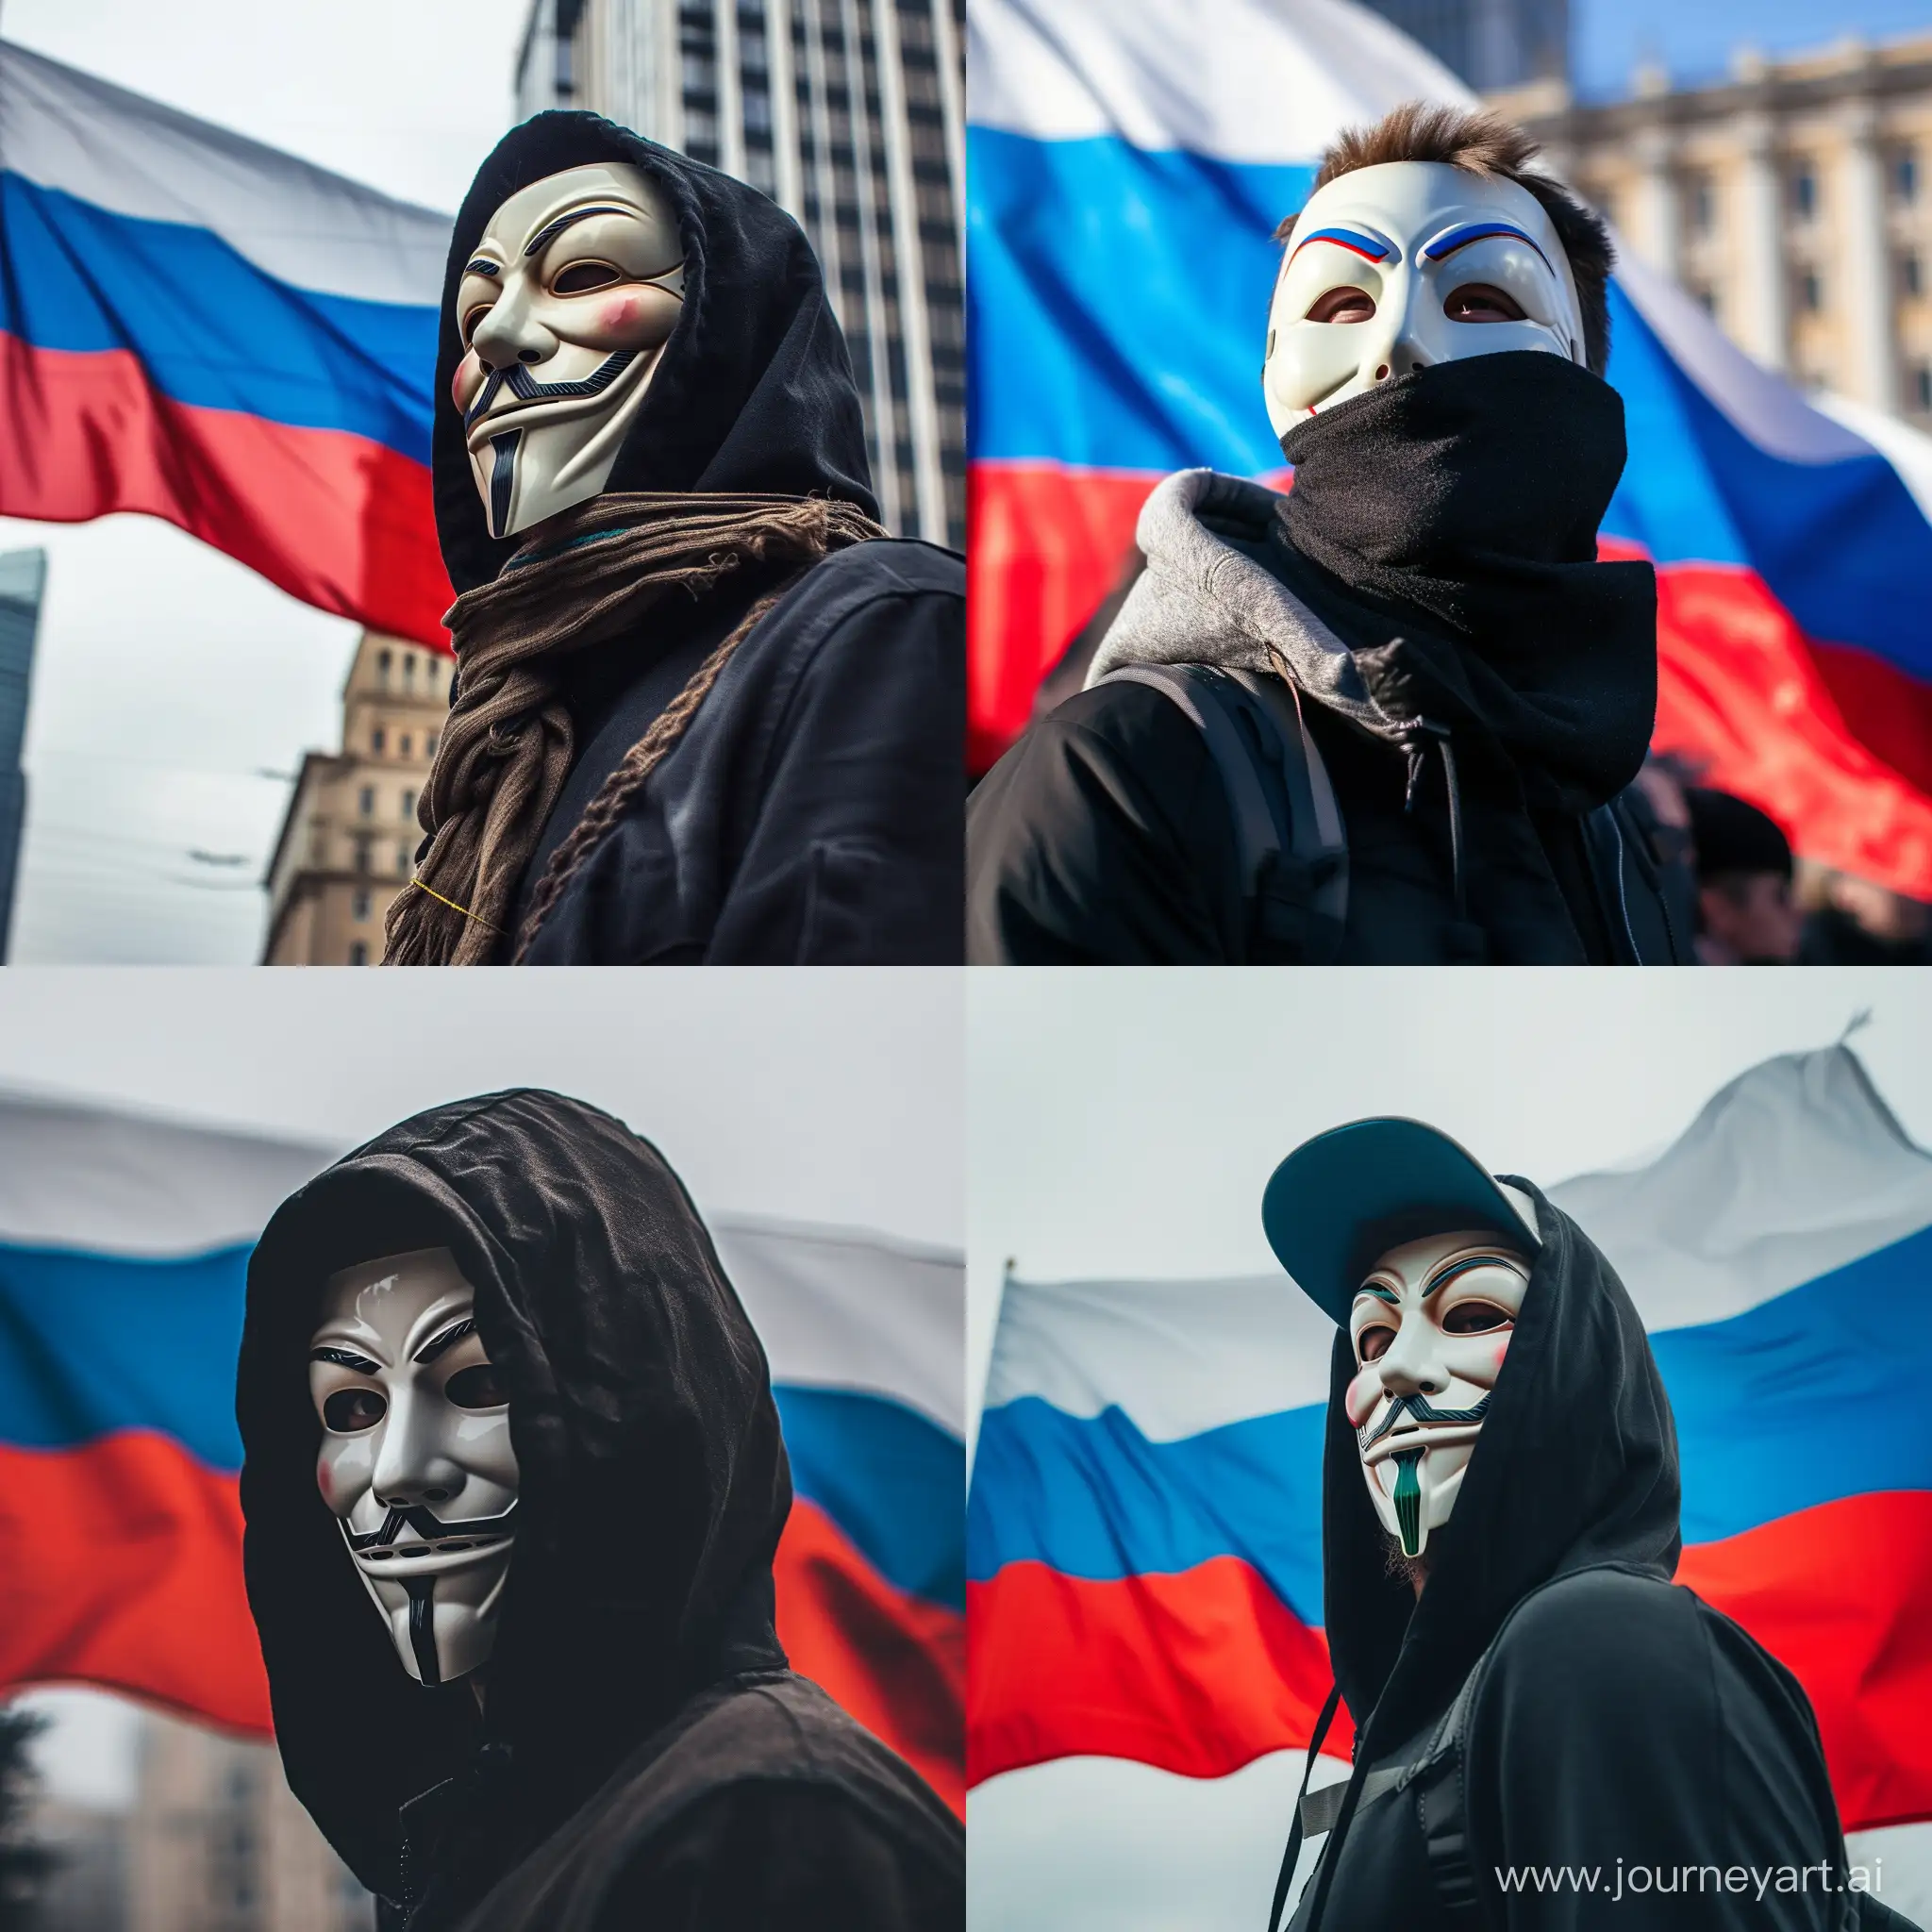 A man in an anonymous mask on the background of the Russian flag